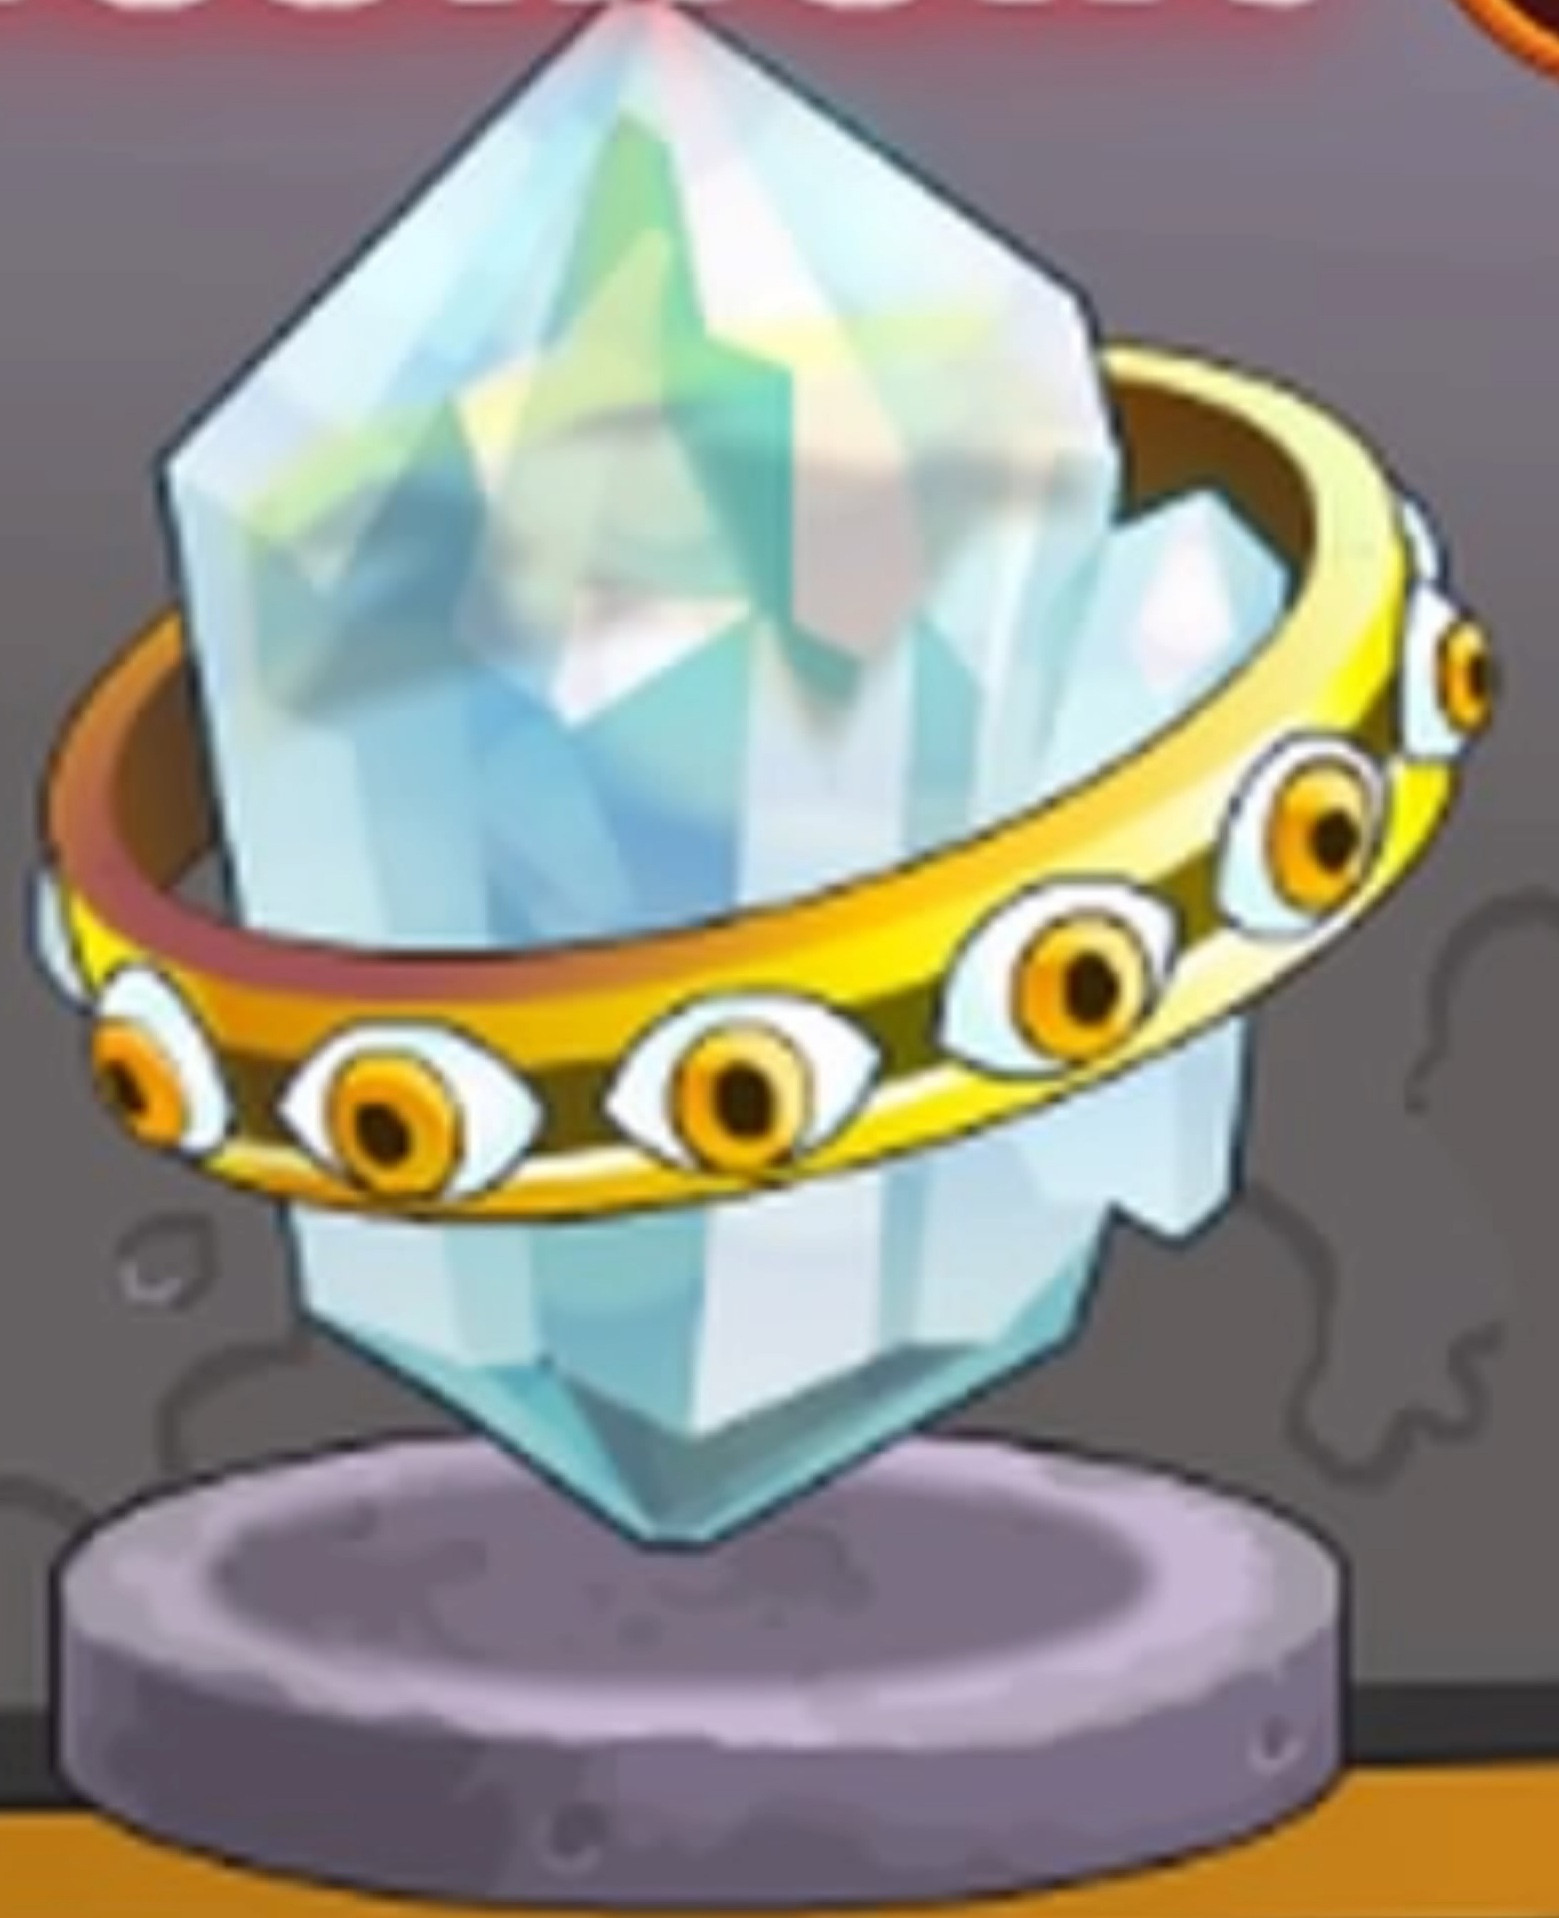 Clicker Heroes Achievement guide